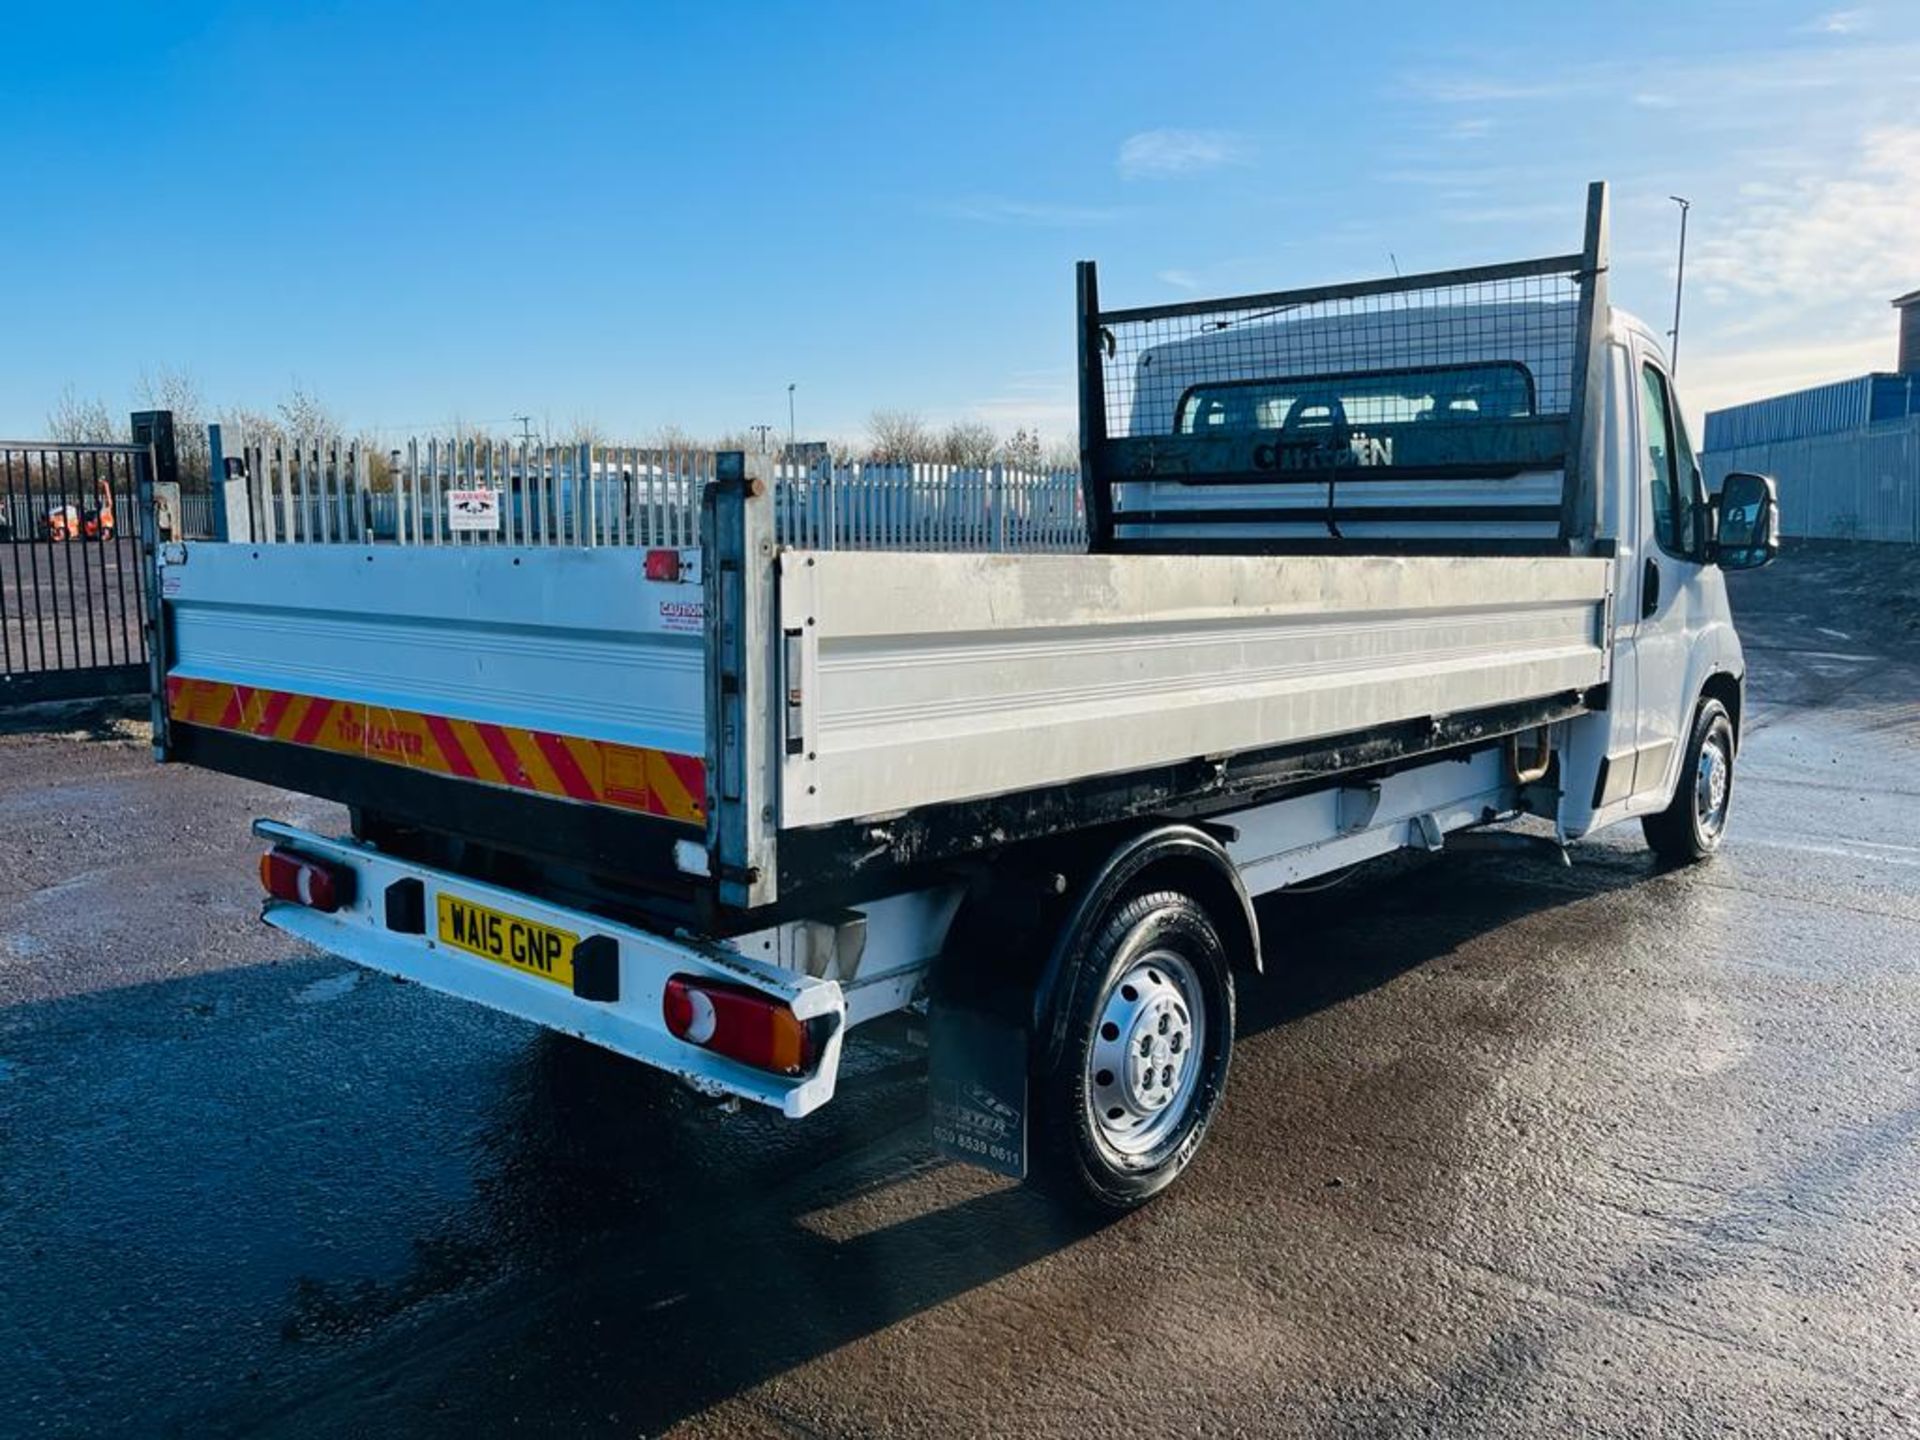 ** ON SALE ** Citroen Relay 35 2.2 HDI 130 LWB Alloy Tipper 2015 '15 Reg' Only 105,090 Miles - Image 14 of 31